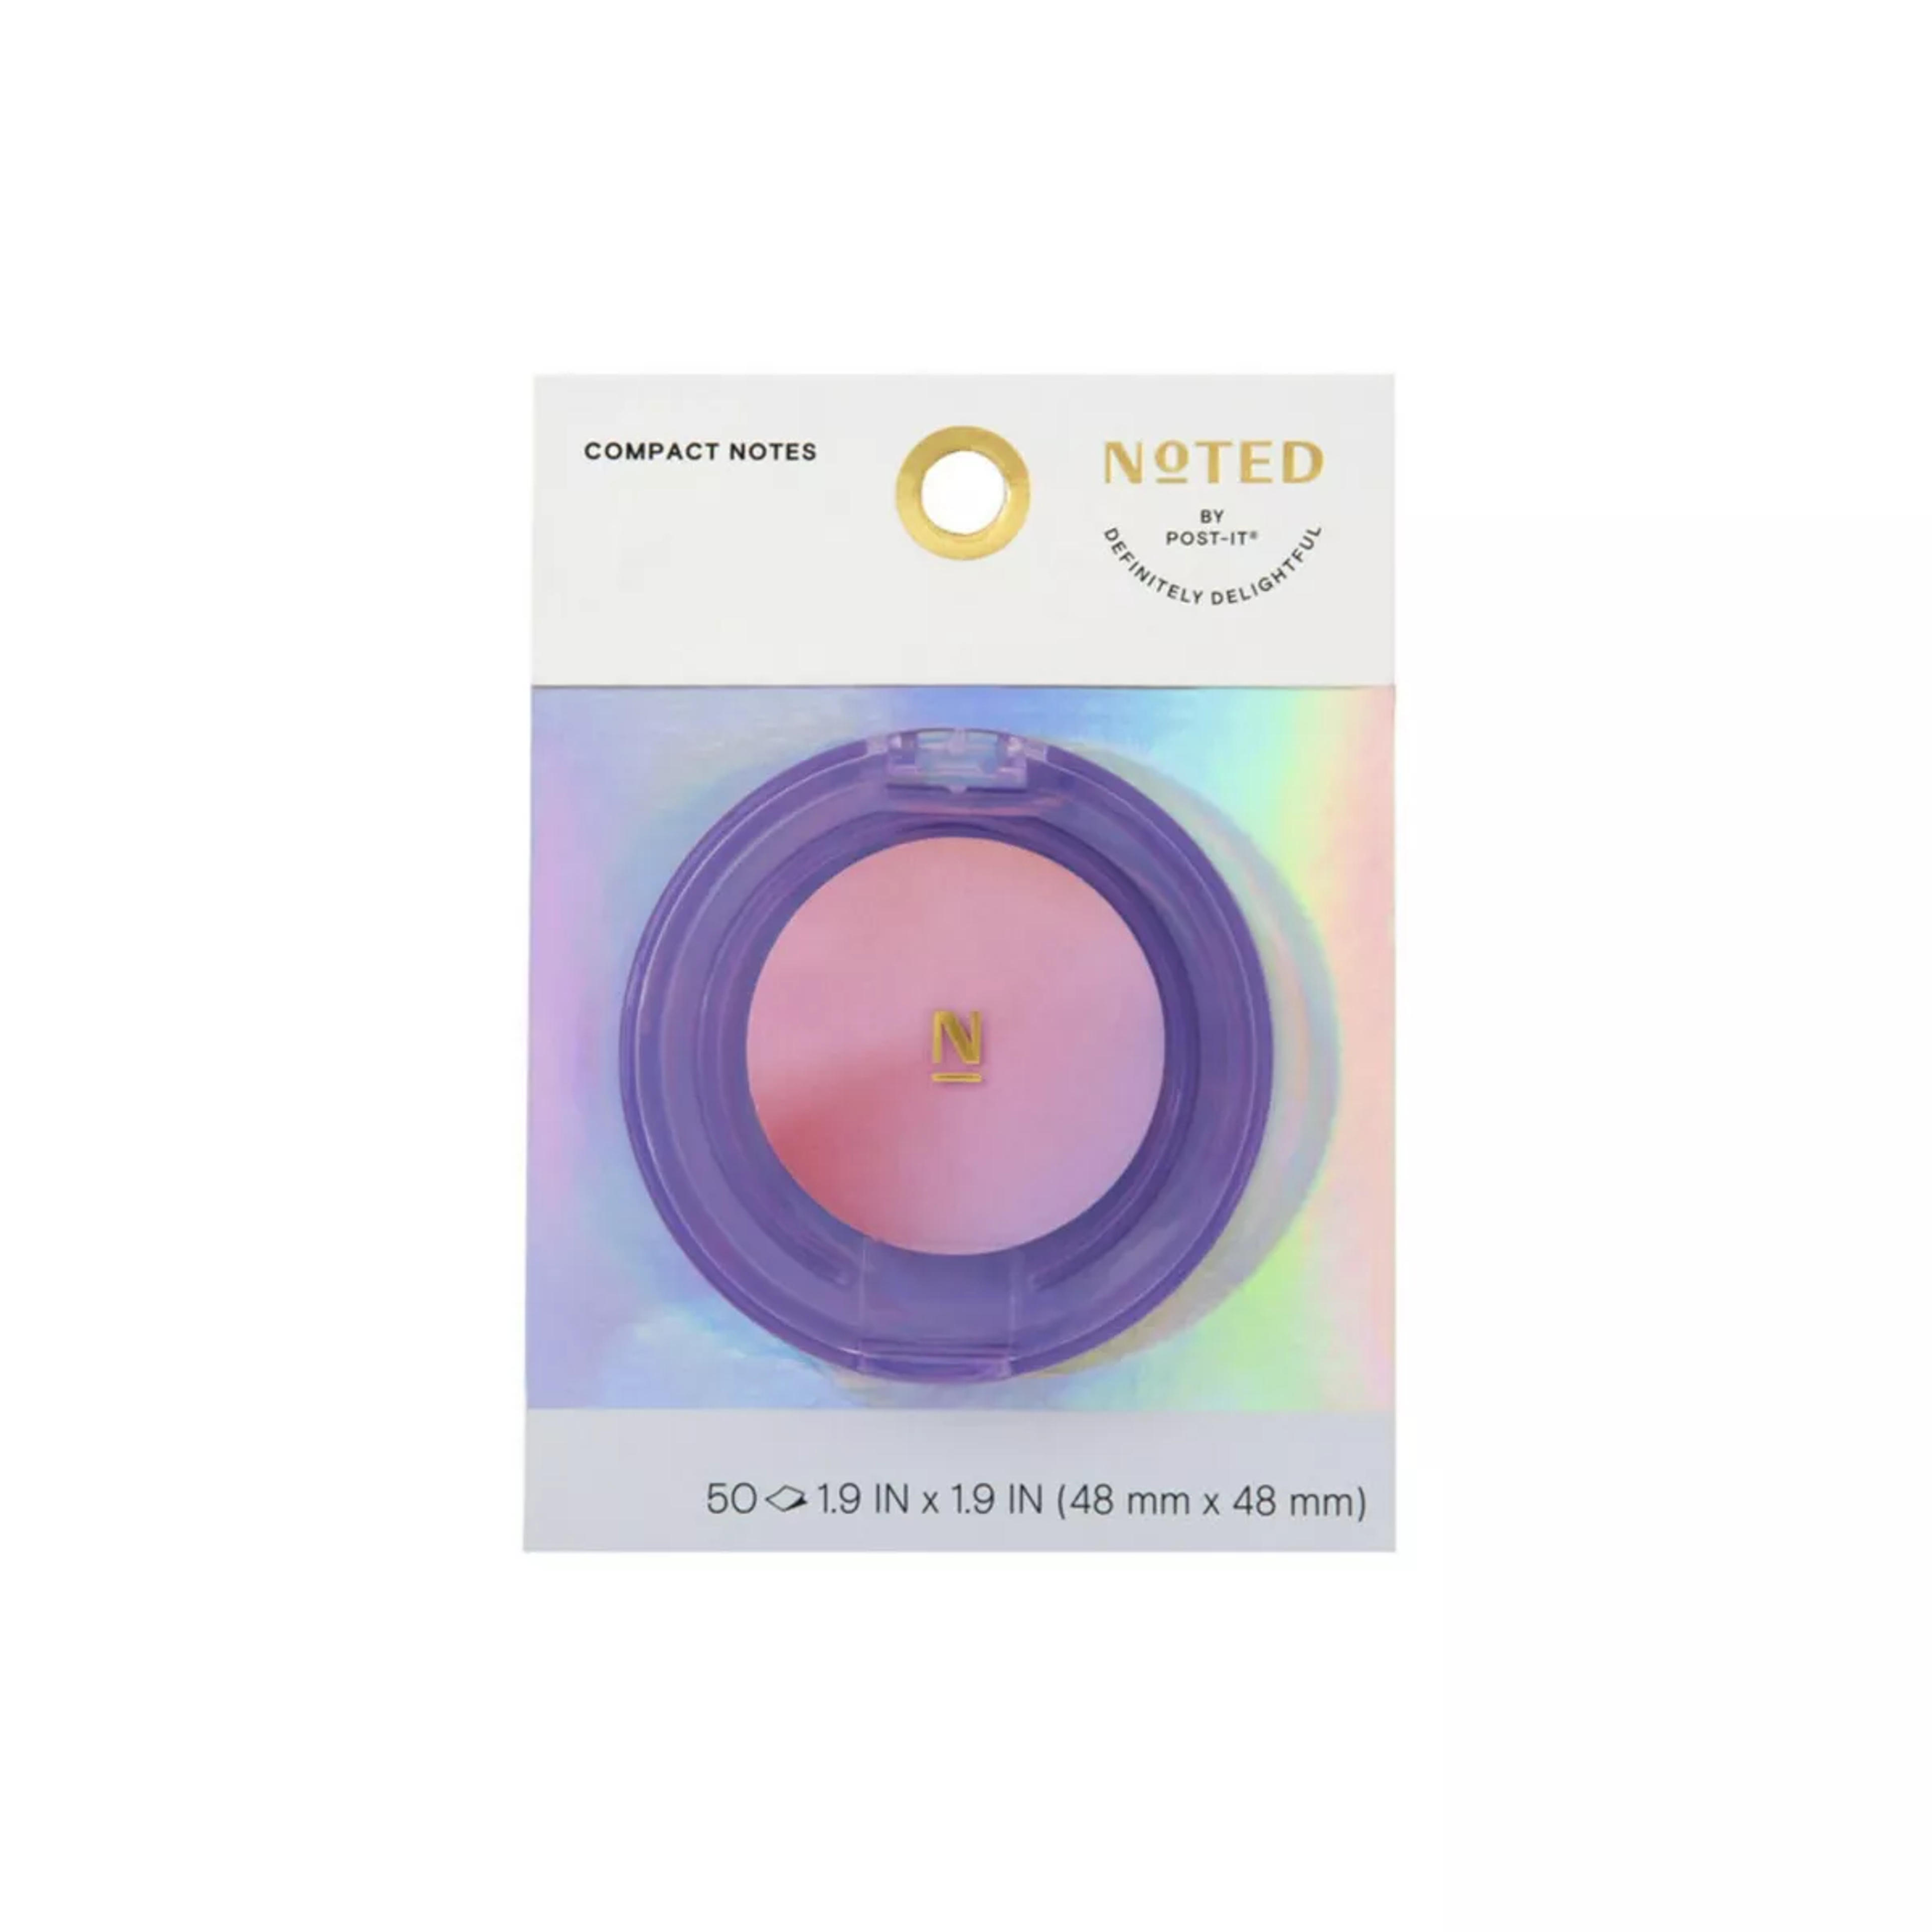 Post-it Compact Sticky Notes 2"x 2" Warm : Target